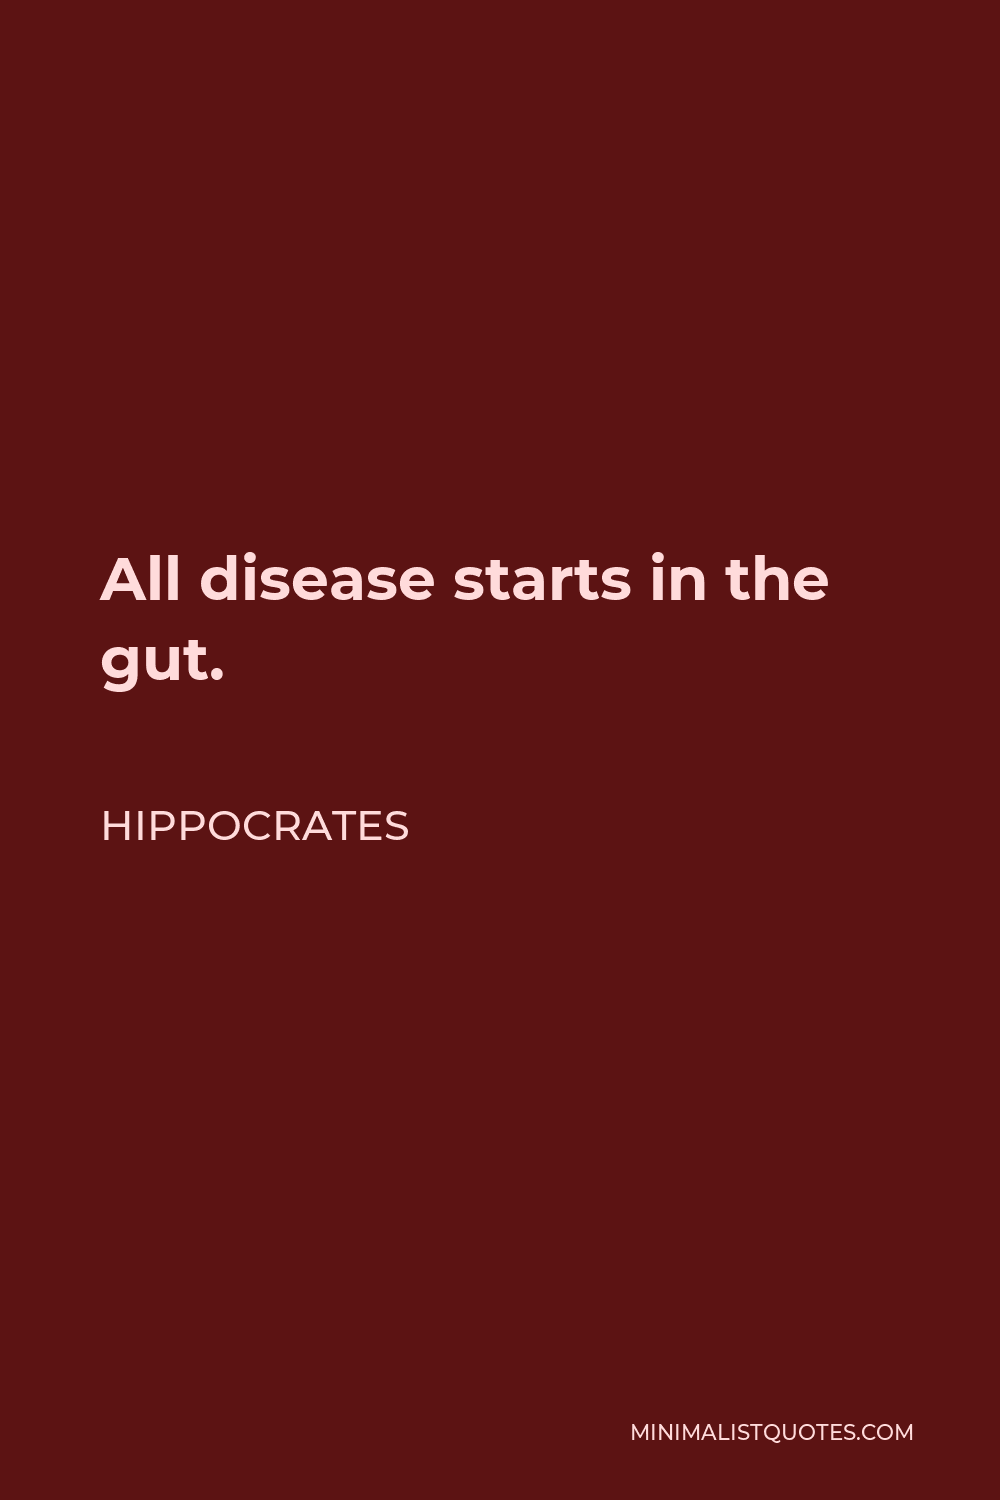 Hippocrates Quote - All disease starts in the gut.